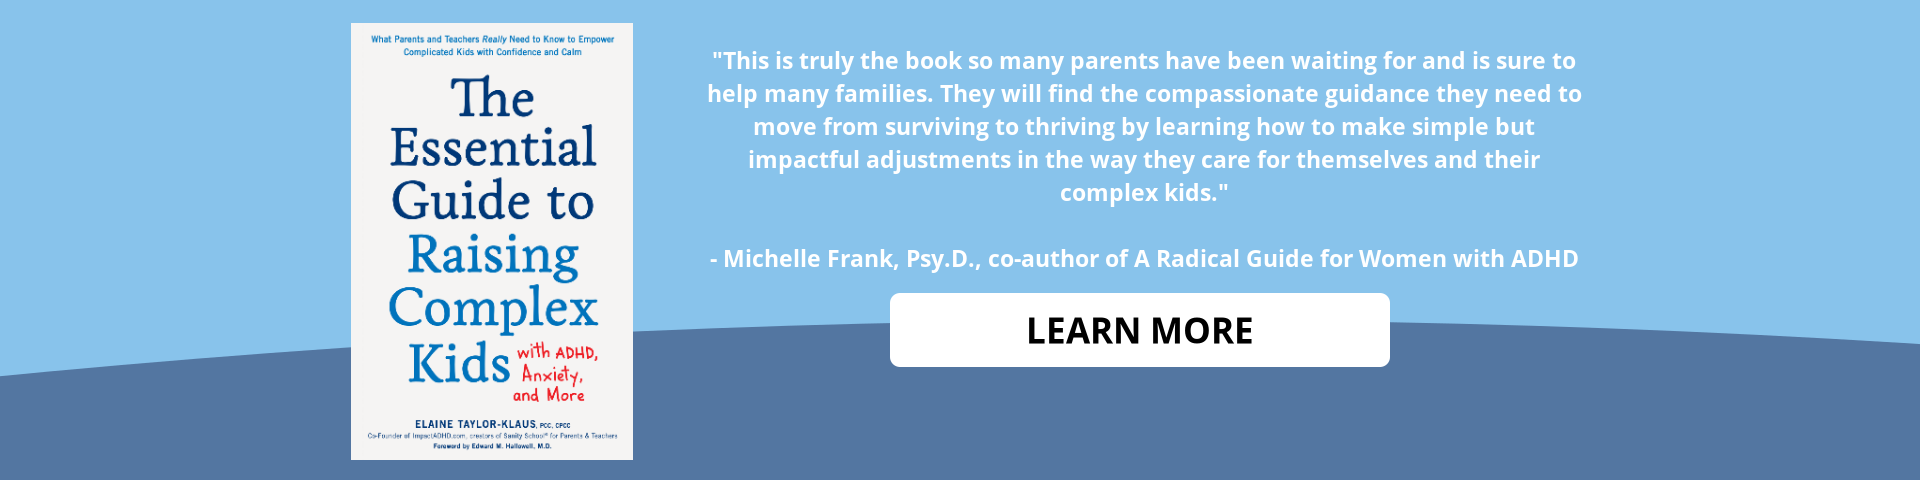 The Essential Guide to Raising Complex Kids with ADHD, Anxiety, and More by Elaine Taylor-Klaus